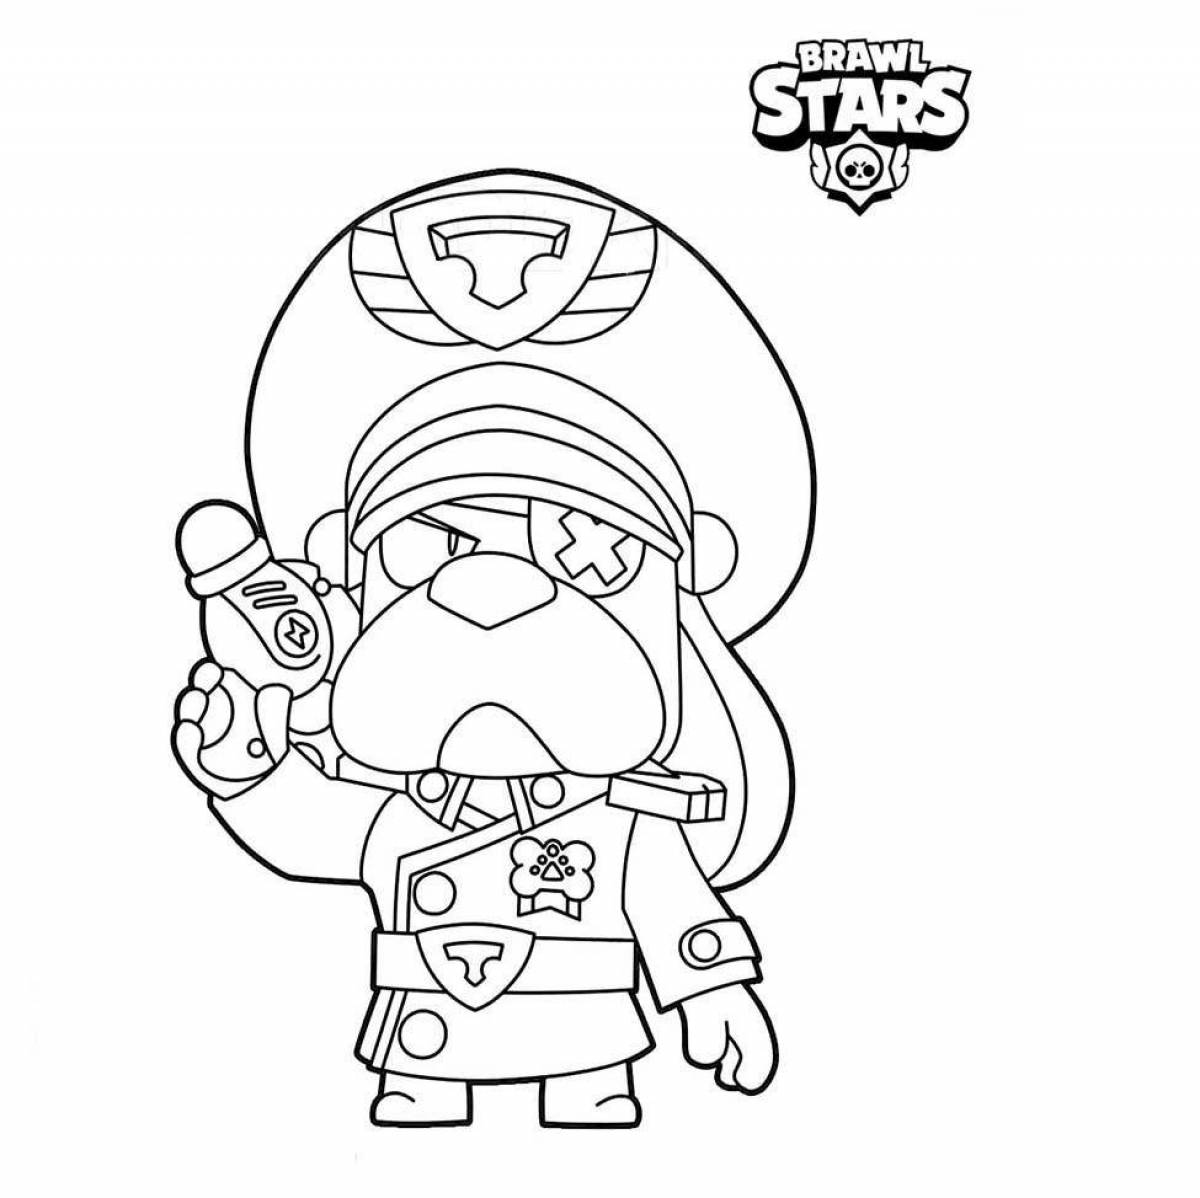 Great griff coloring brawl stars